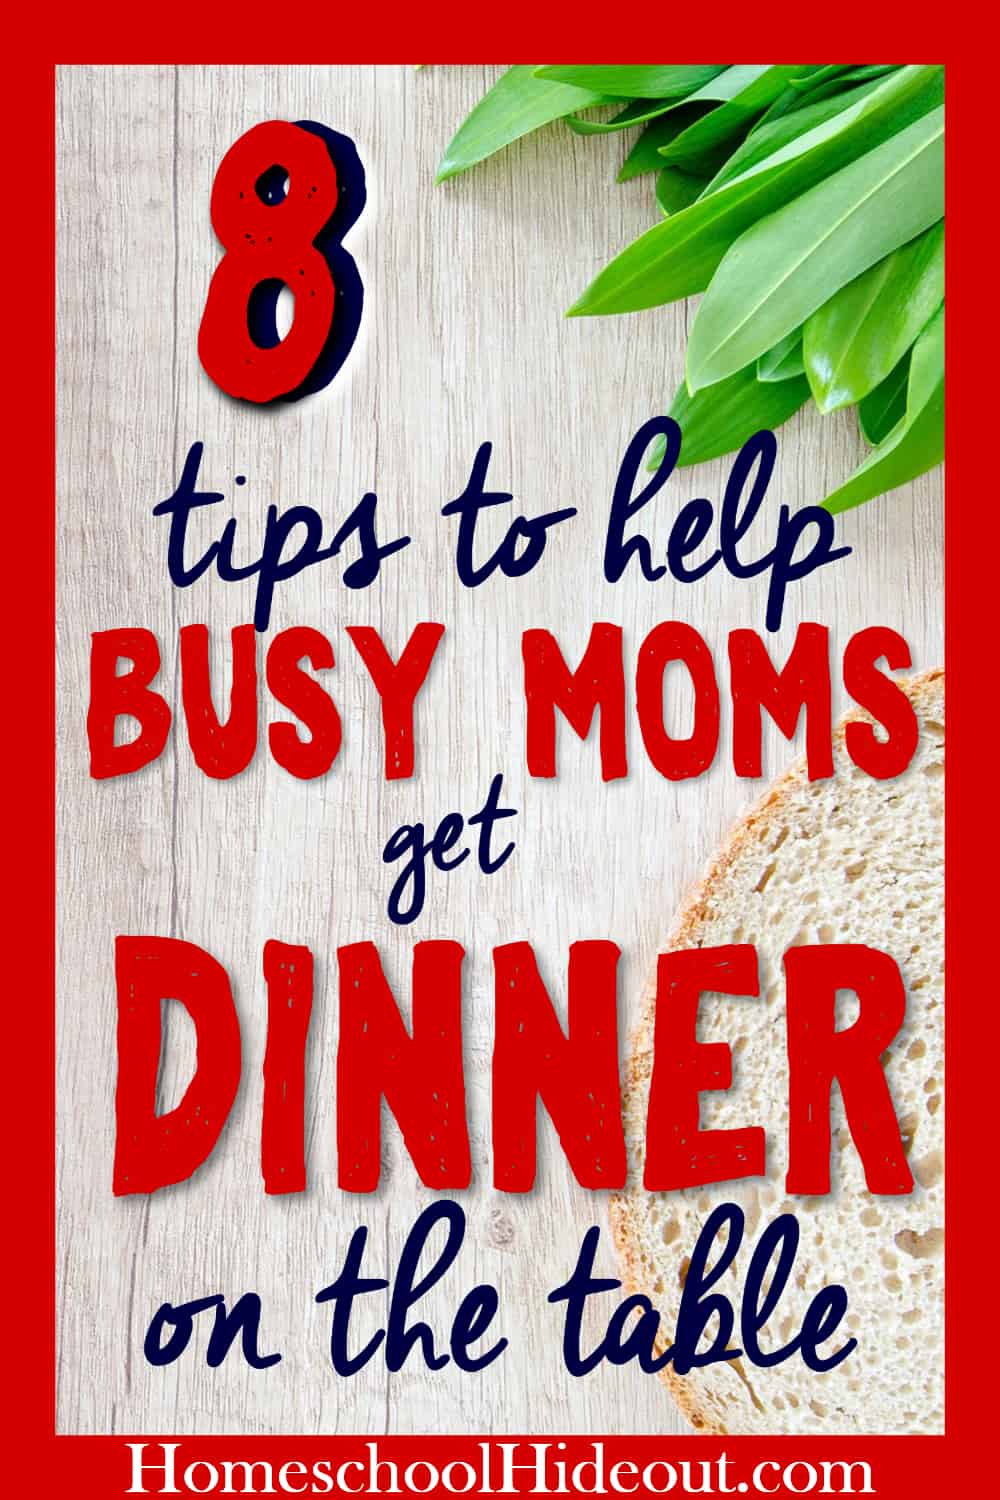 These are super awesome tips to help busy mamas get dinner on the table, night after night!